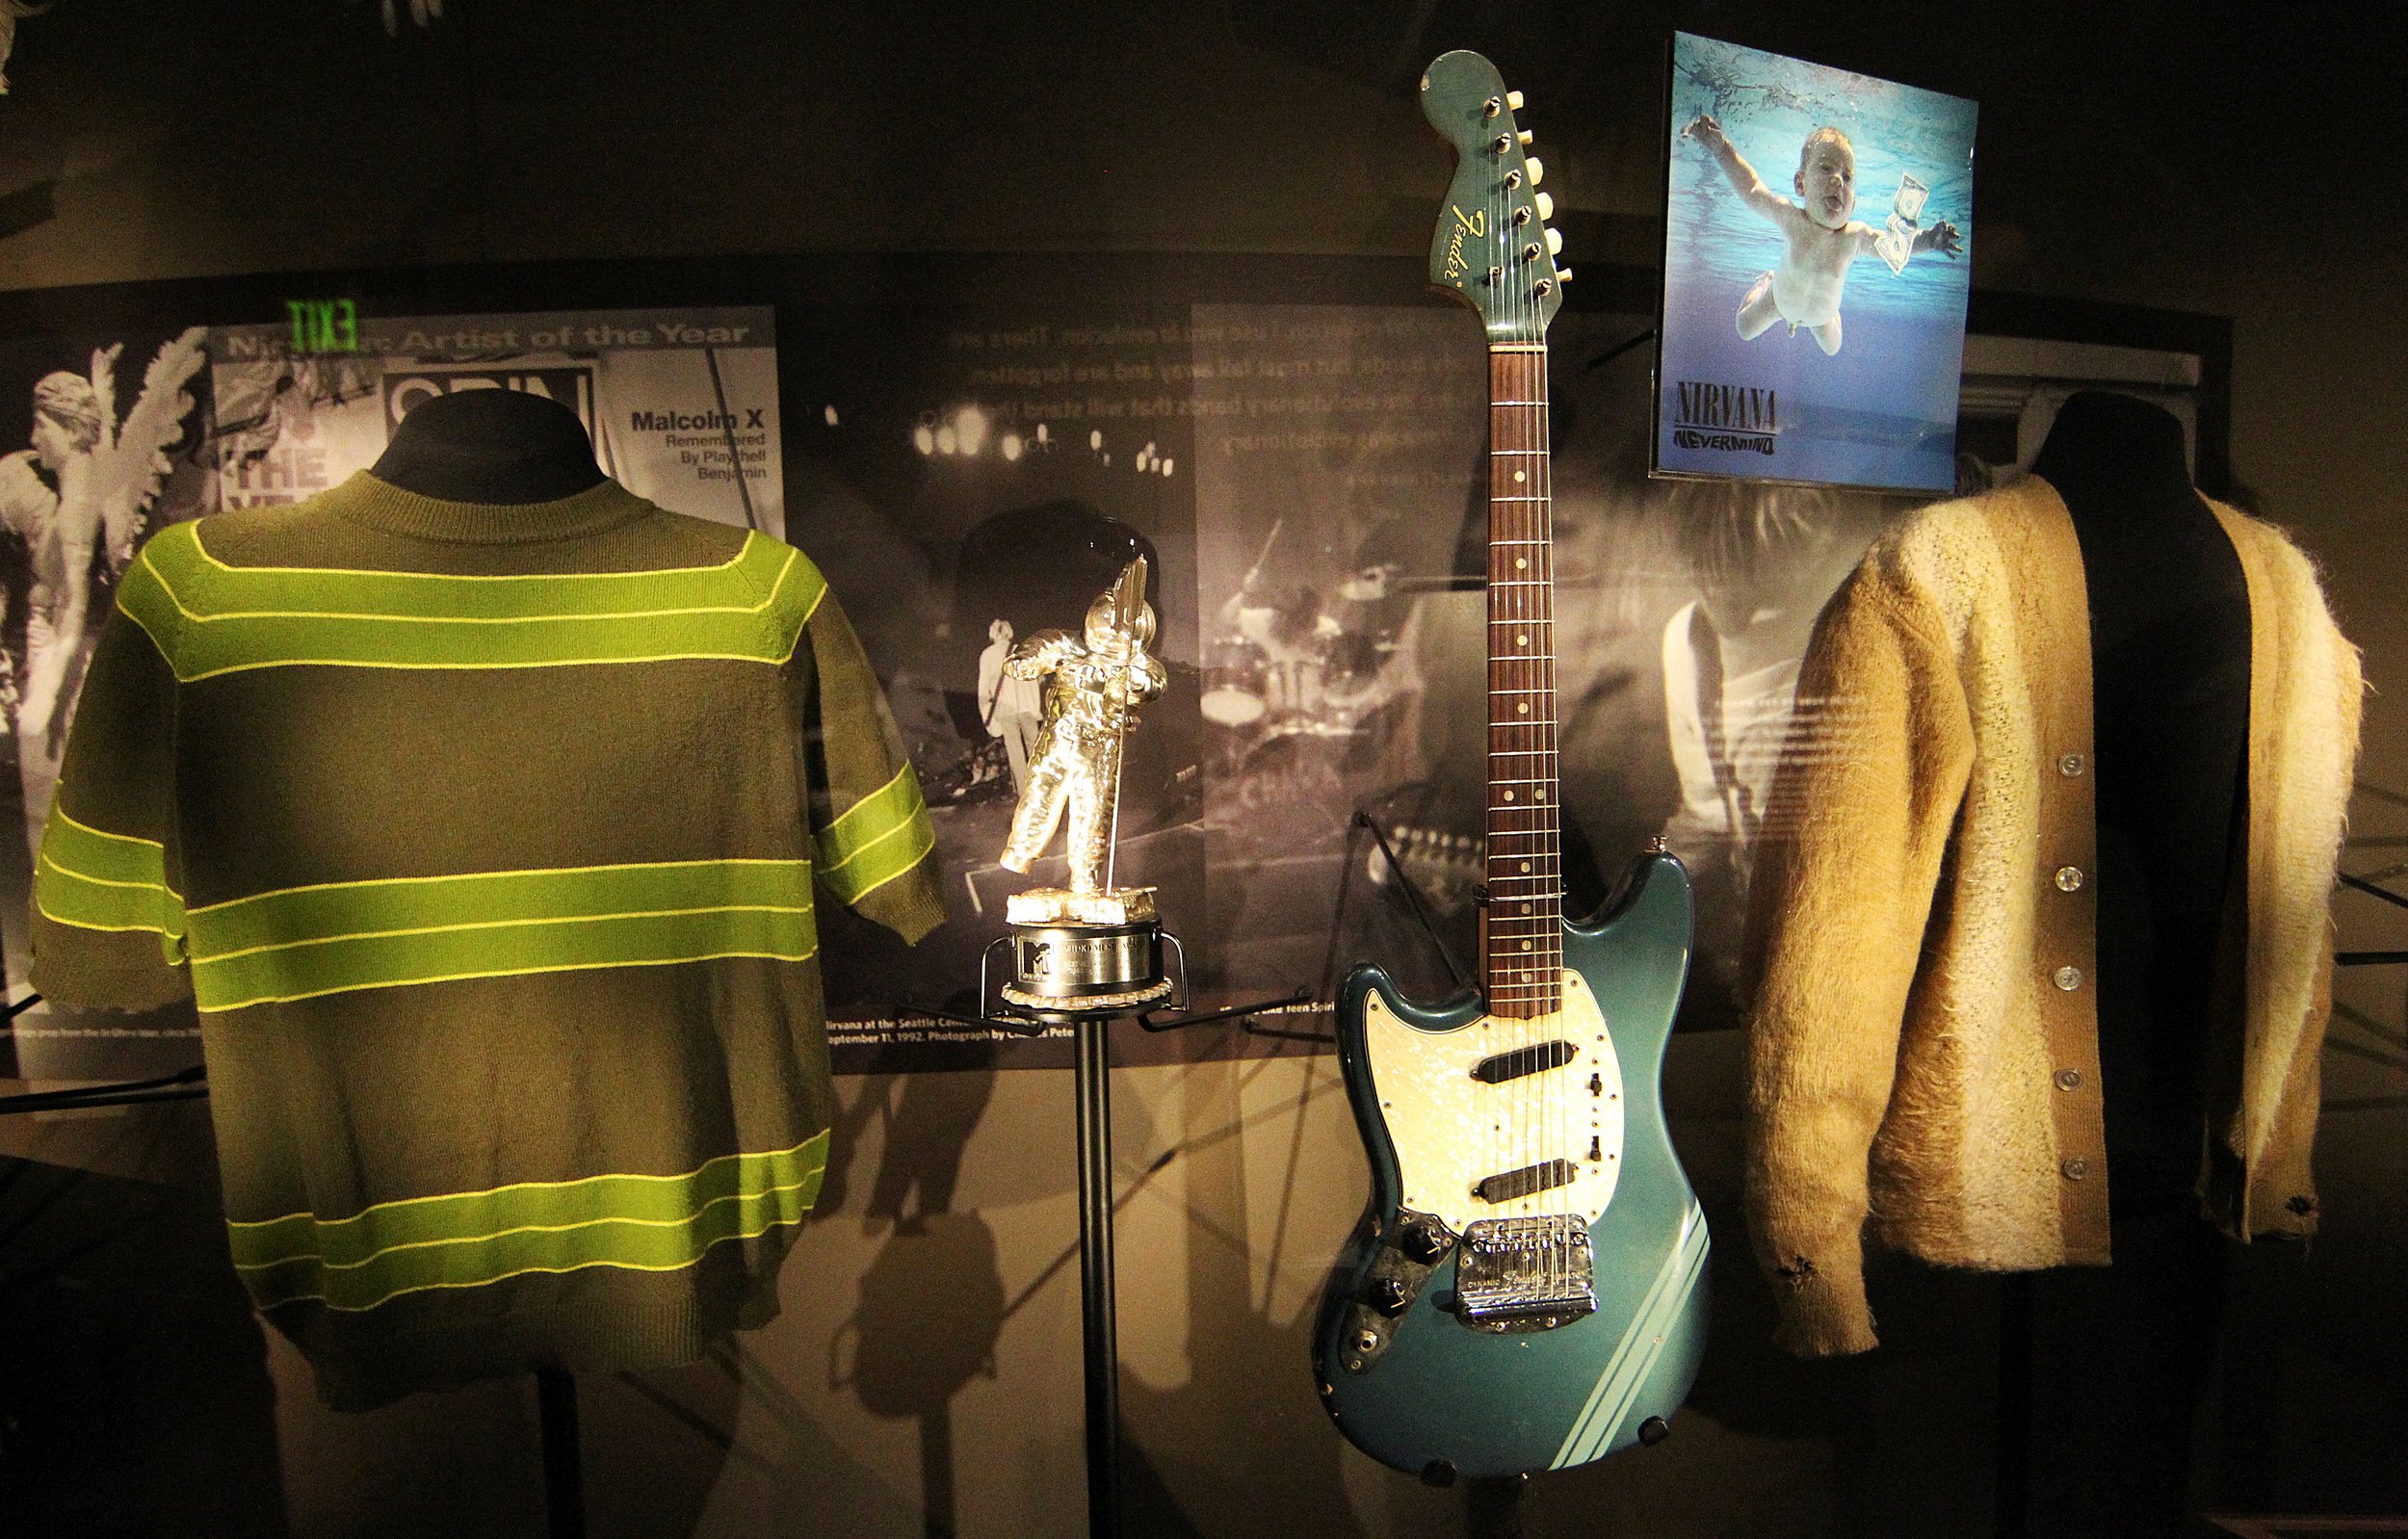 Kurt Cobain's blue guitar in Nirvana's 'Smells Like Teen Spirit' video to be sold at auction